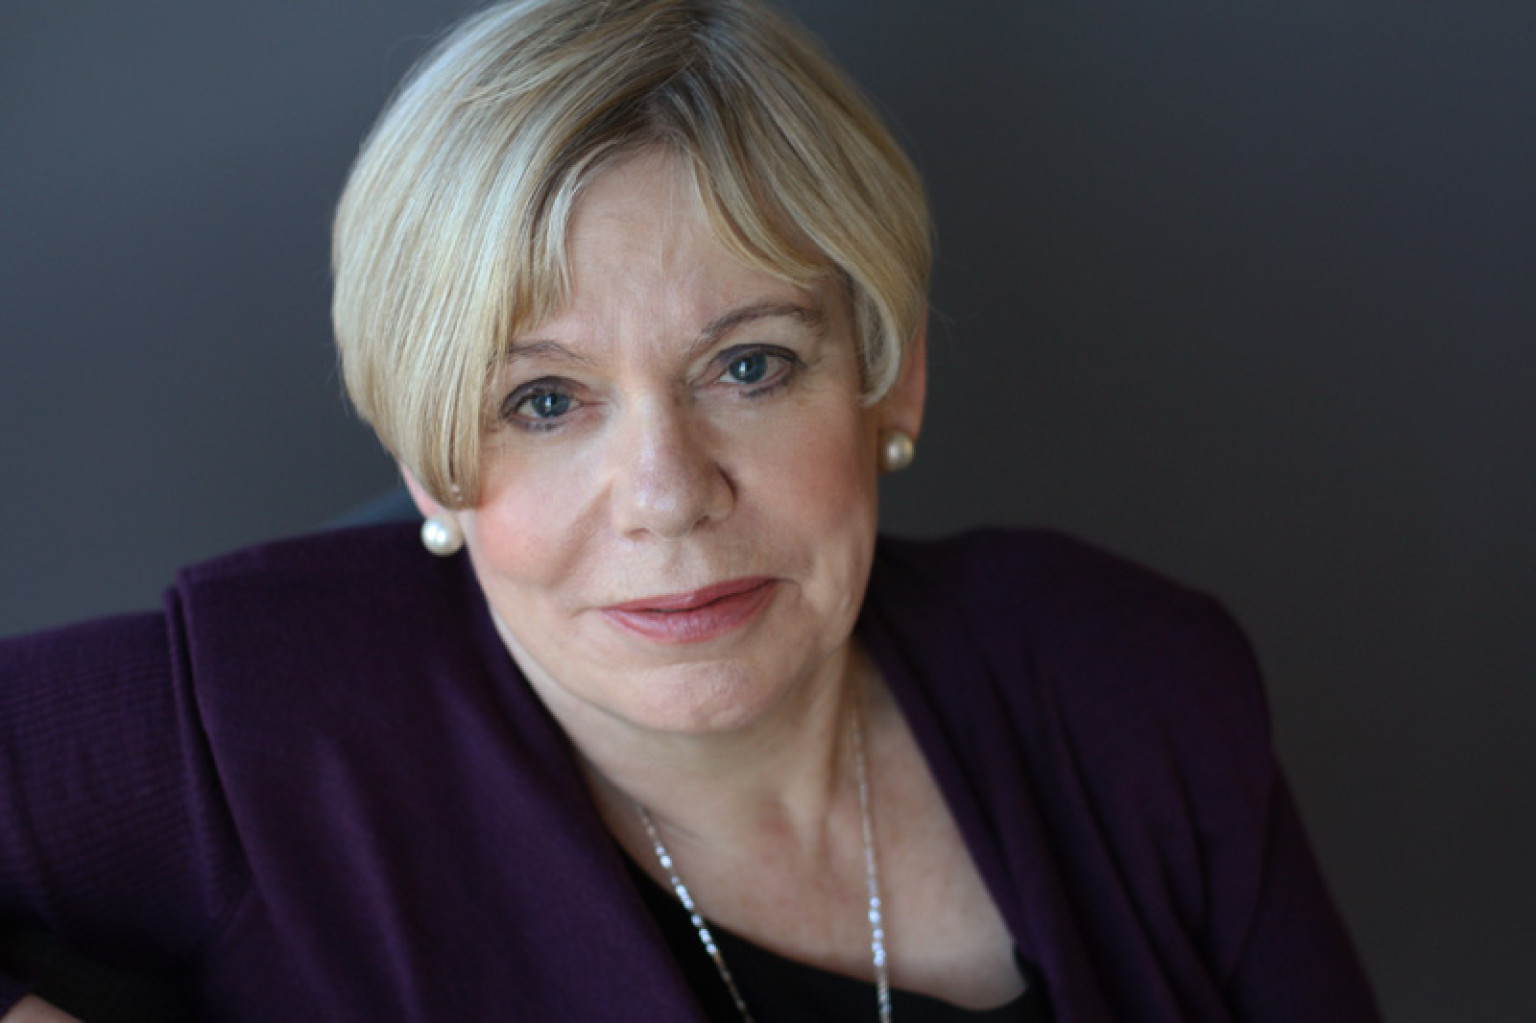 Karen Armstrong On Letting Go Of The Desire To Know It All1536 x 1023